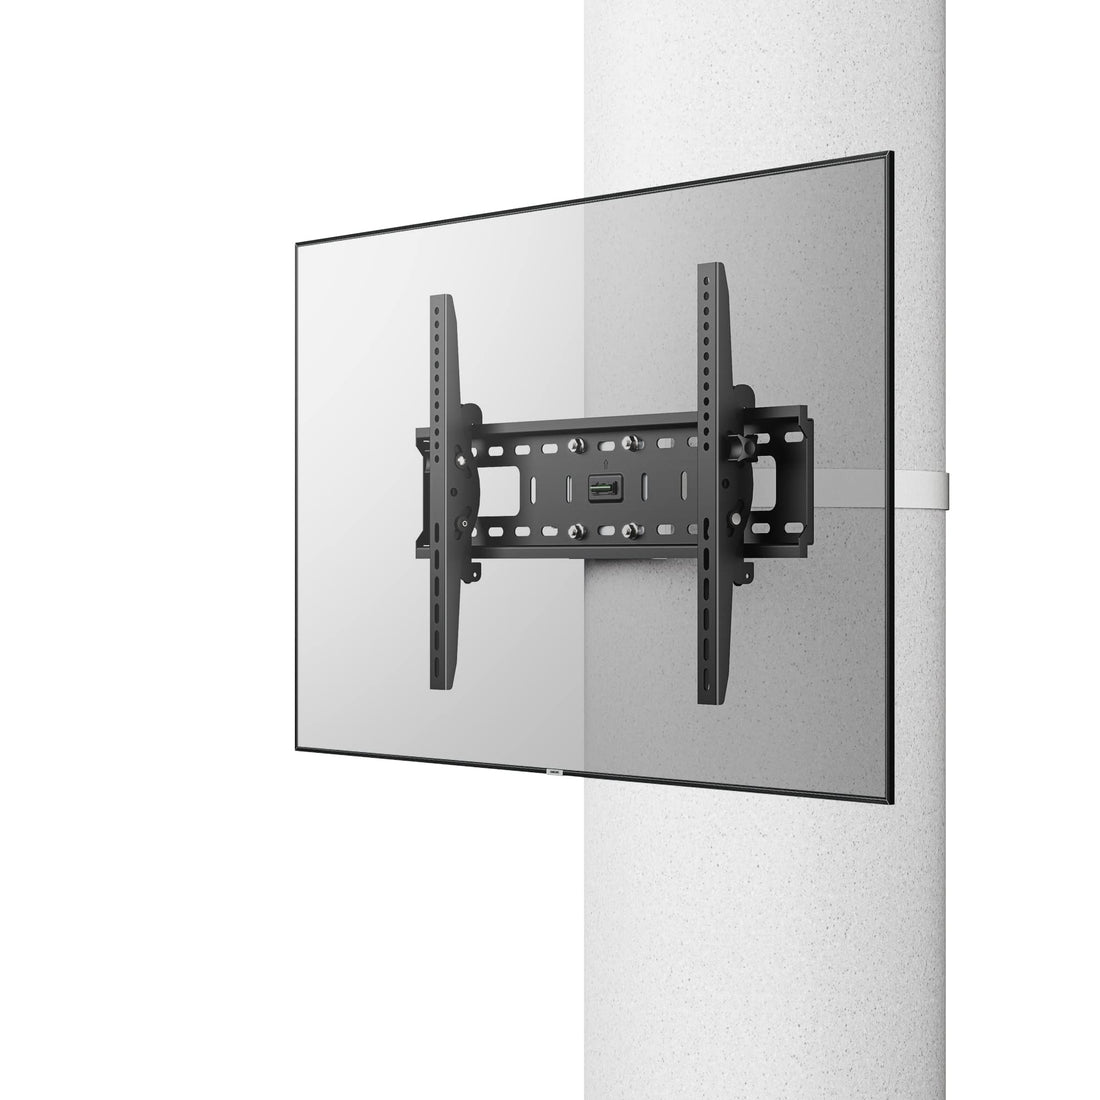 How do I know if a wall mount is compatible with my TV?